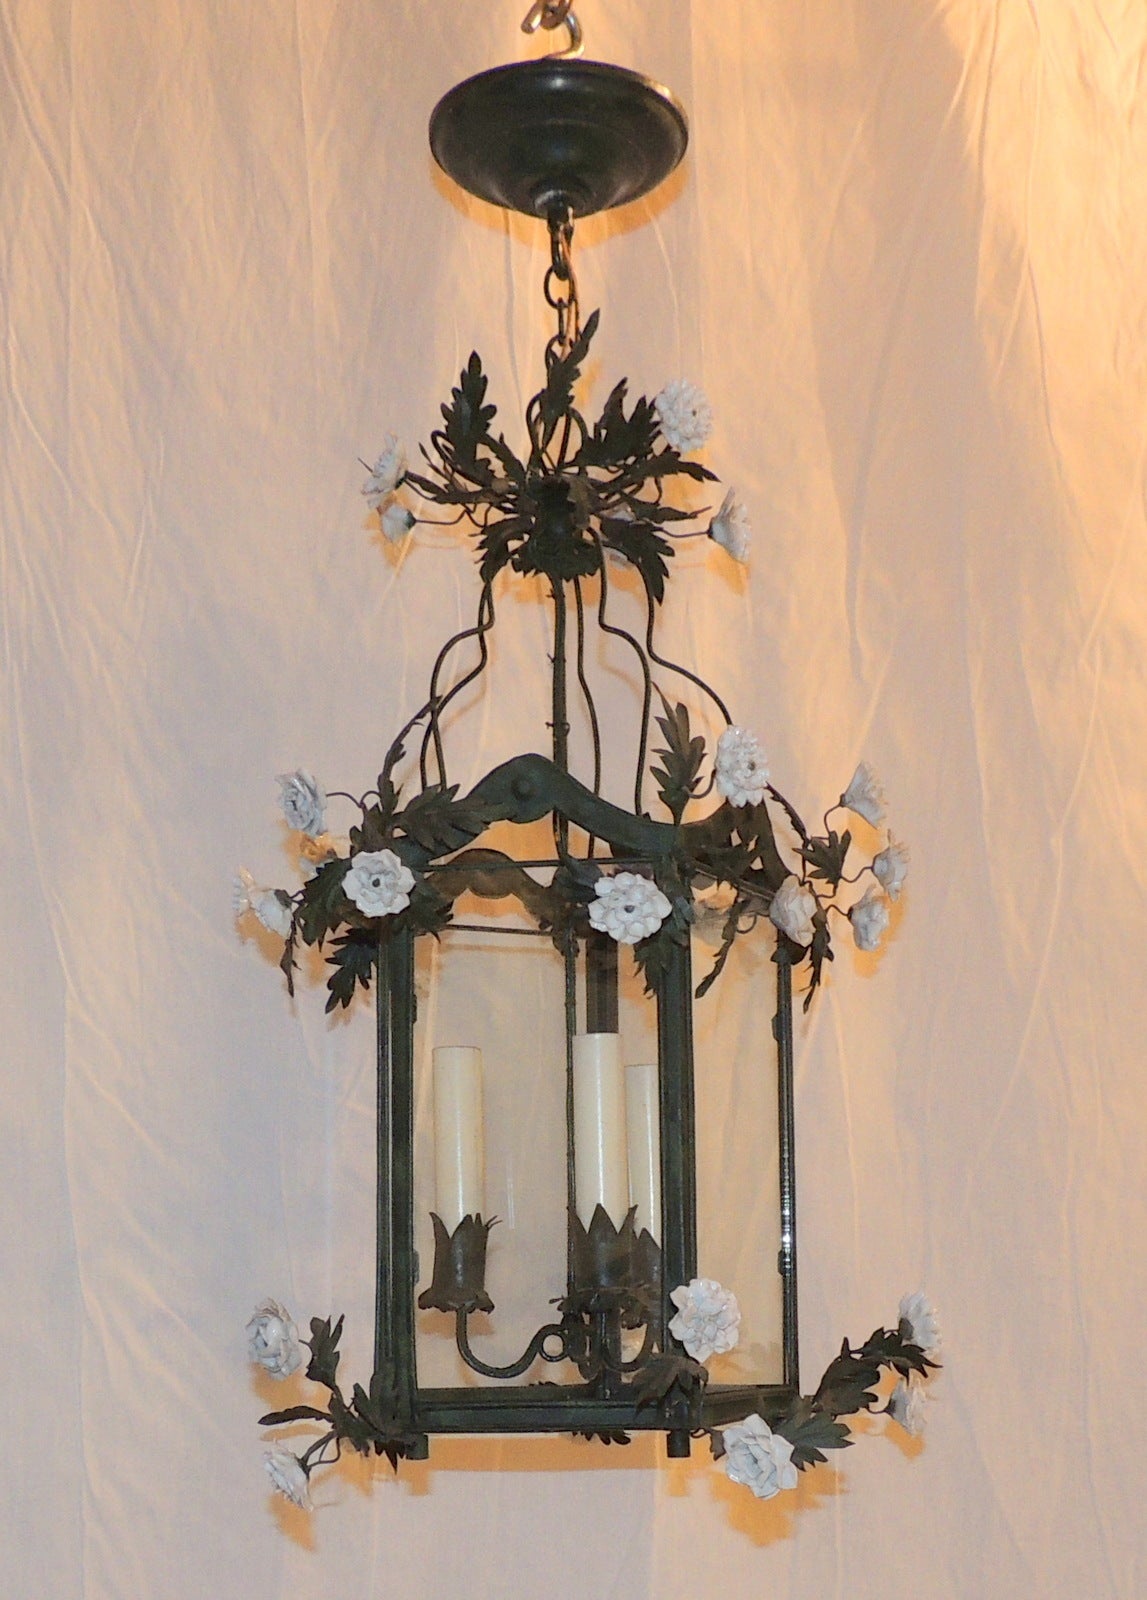 An enchanting green metal lantern with wonderful green leaf detail and delicate white porcelain flowers with three lights. Perfect as a hallway or covered porch chandelier or to have an unusual piece in your home.

24